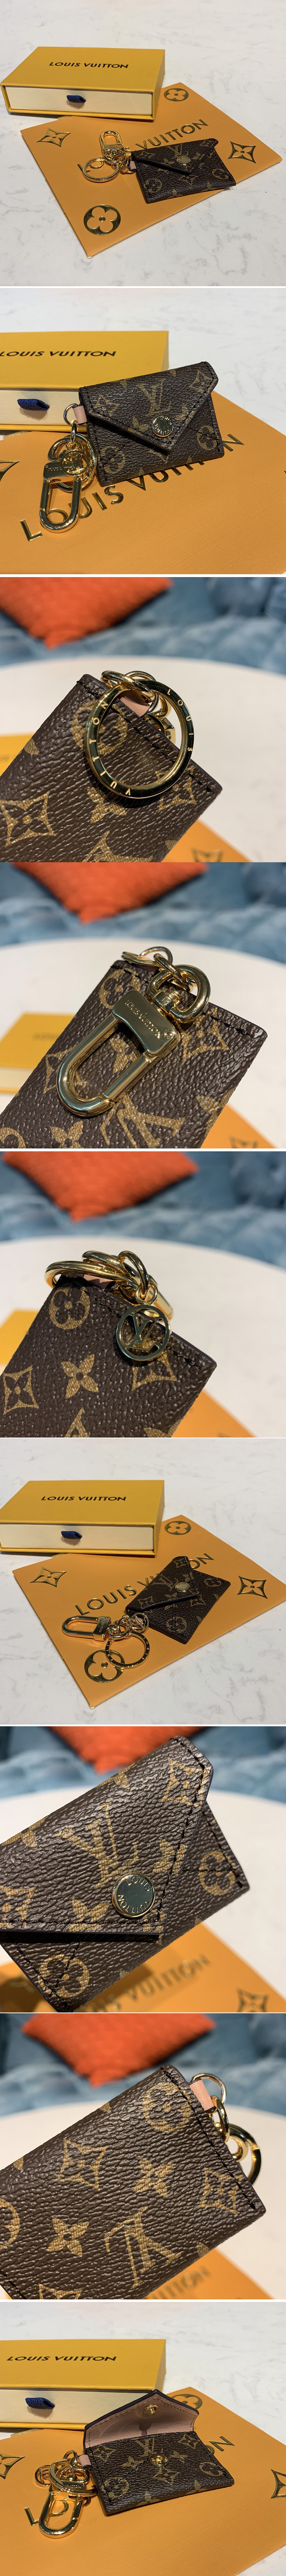 Online Store LOUIS VUITTON KIRIGAMI POUCH BAG CHARM AND KEY HOLDER - $149.00